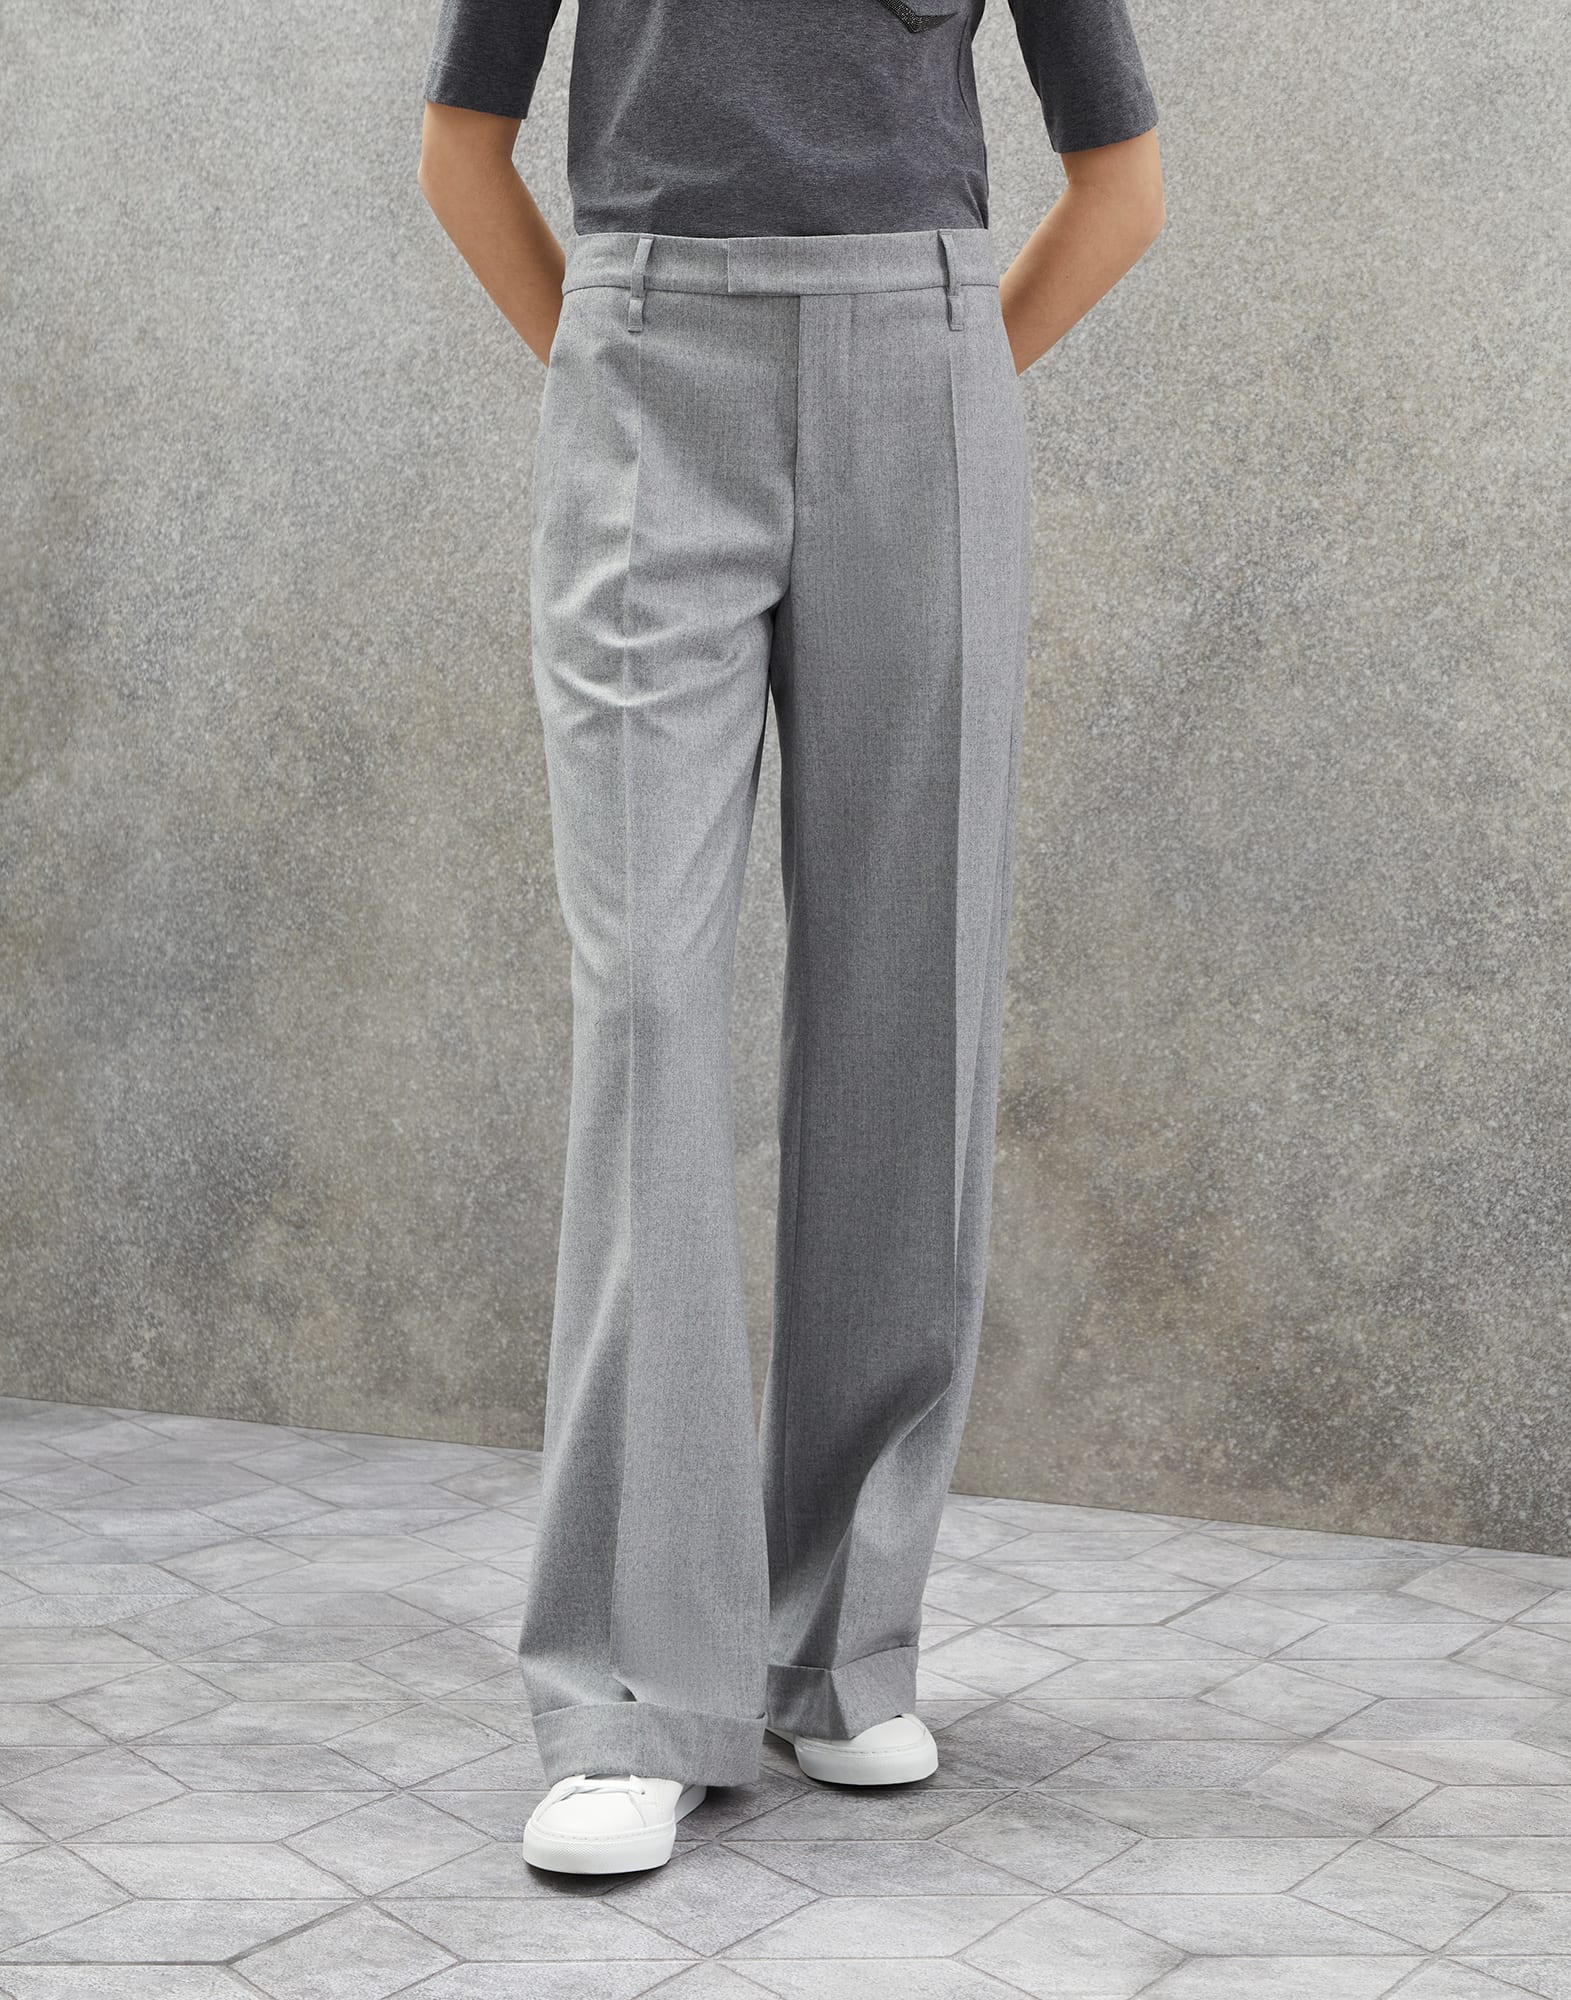 Buy Marks & Spencer Pure Wool Flannel Trousers_3XL MID Grey at Amazon.in